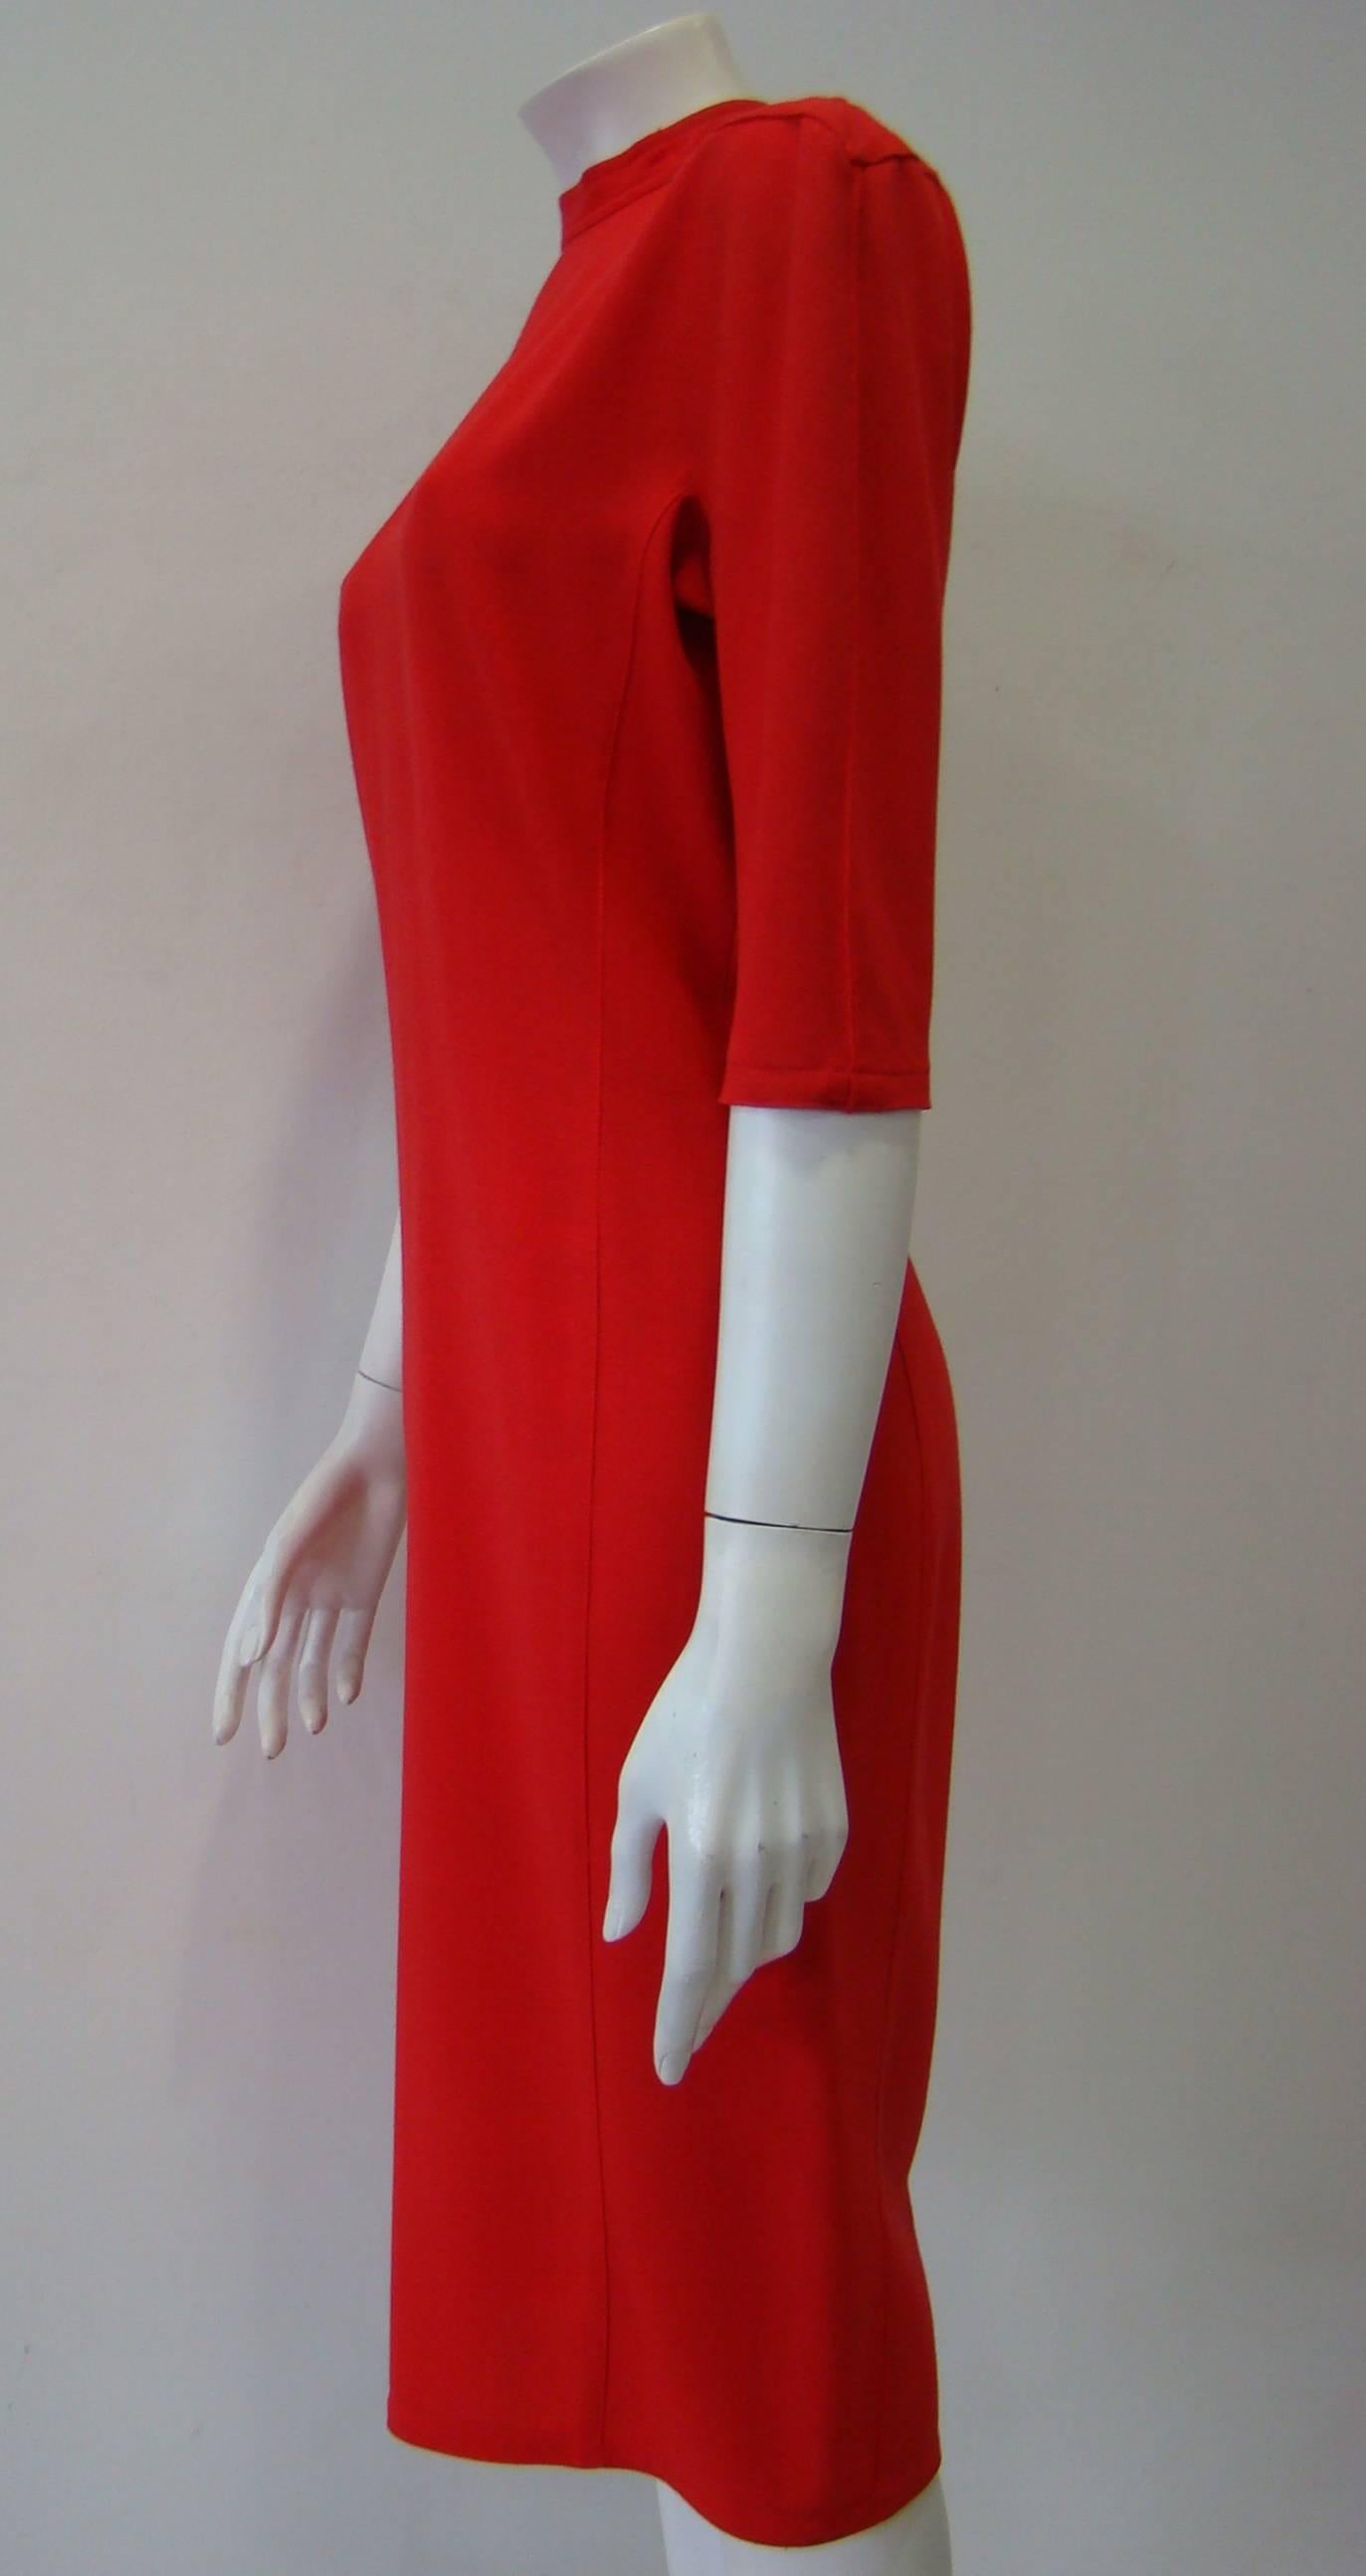 Rare Gianni Versace Red Dress. 100% Wool With A Simple Design Featuring Mid Length, And A Back Zip Fastening. Unlined And Not Tight Red Dress. An Easy Choice For Going Outs.